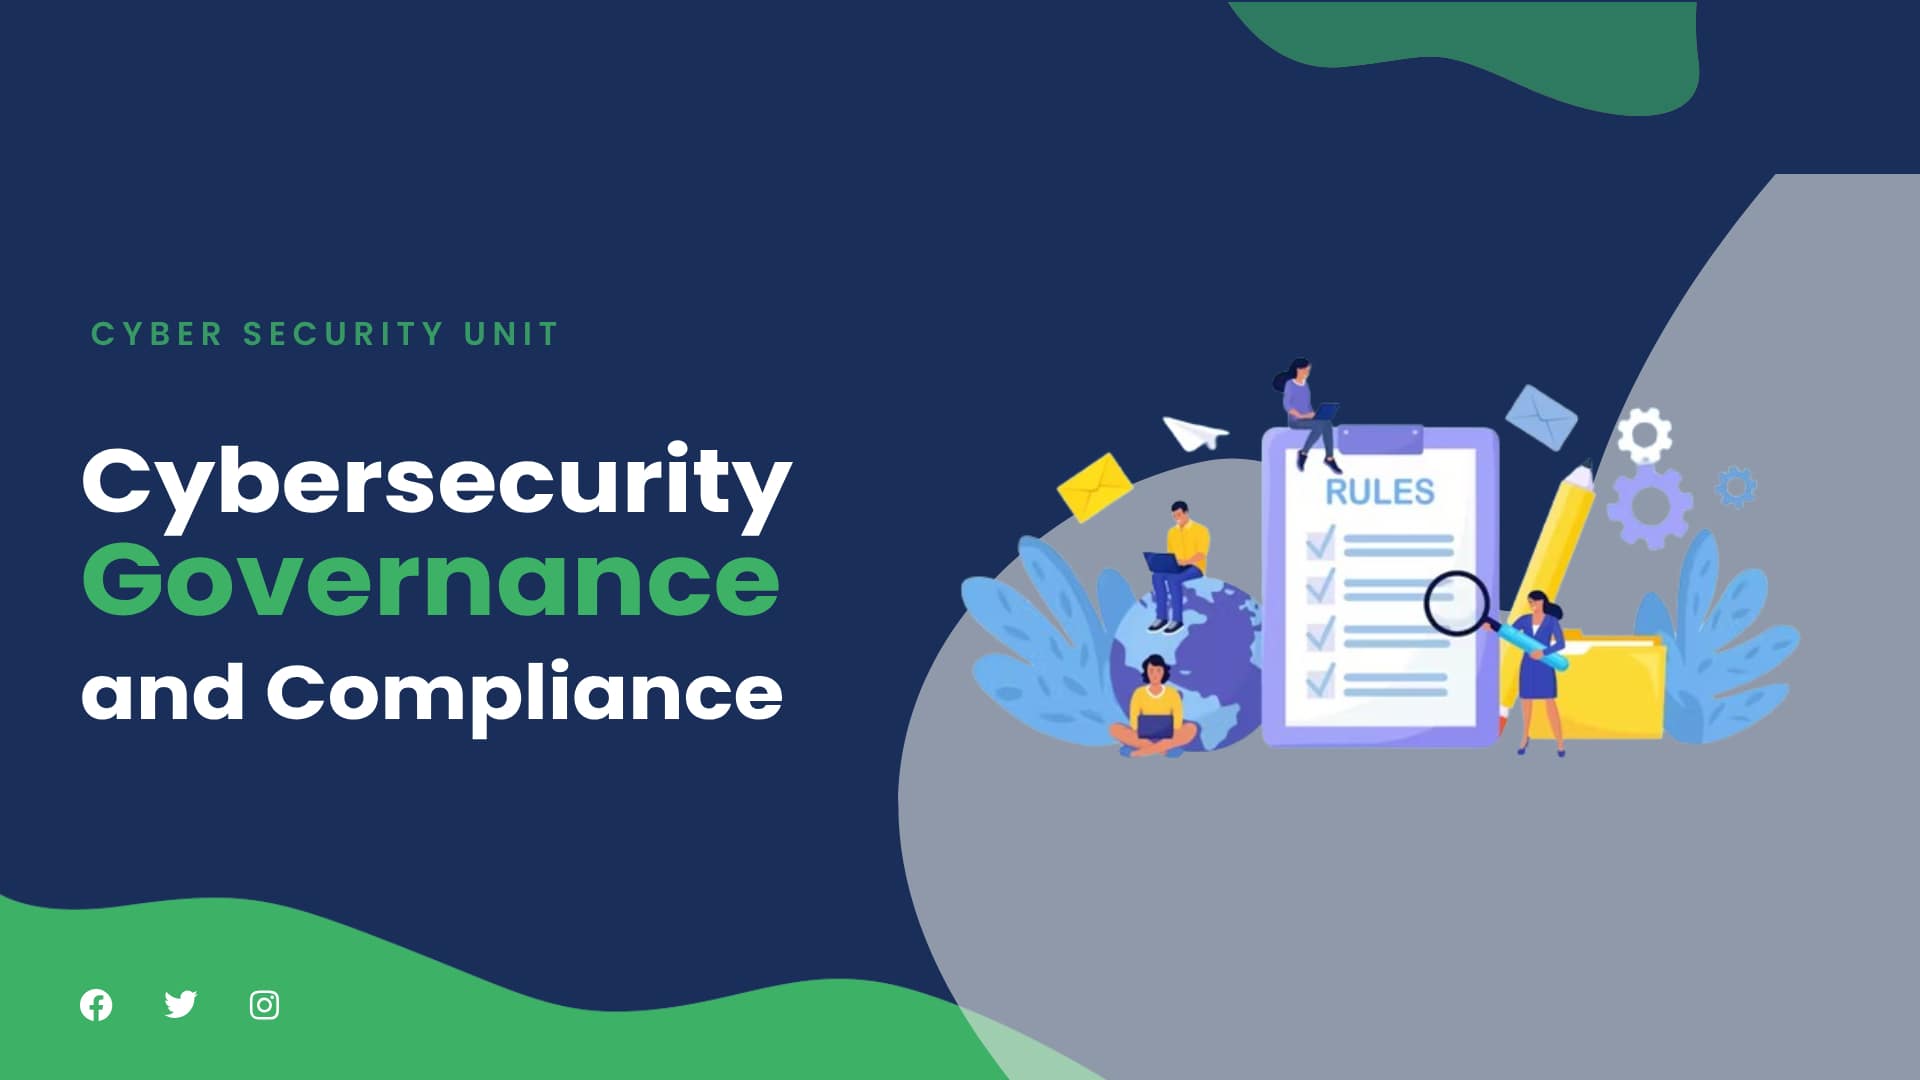 Cybersecurity Governance and Compliance